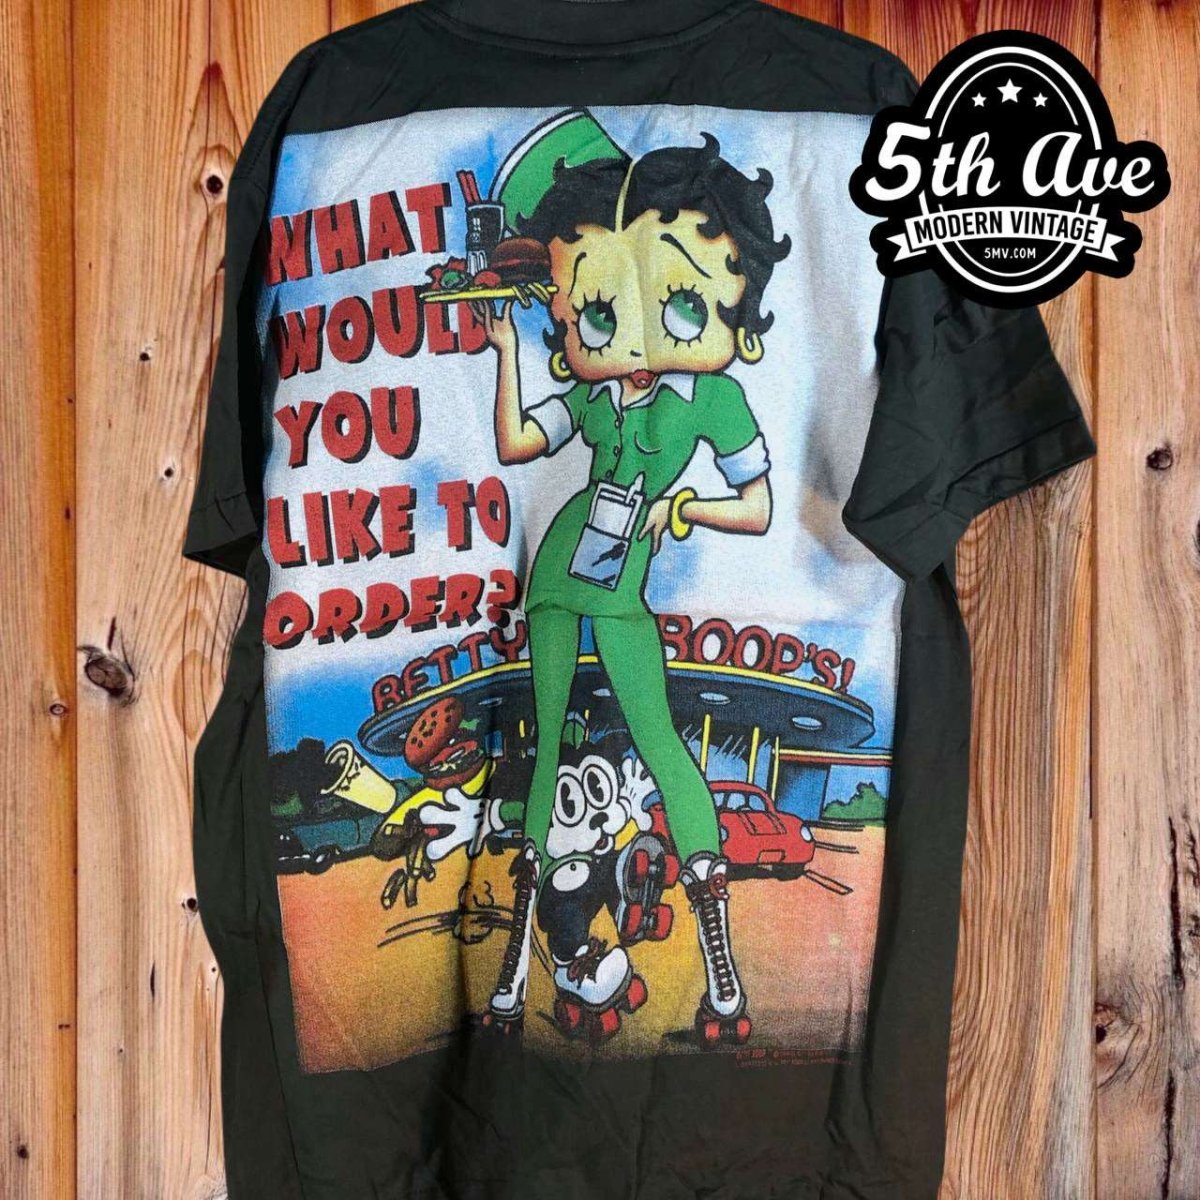 Betty Boop What Would You Like to Order - AOP all over print New Vintage Animation T shirt - Vintage Band Shirts